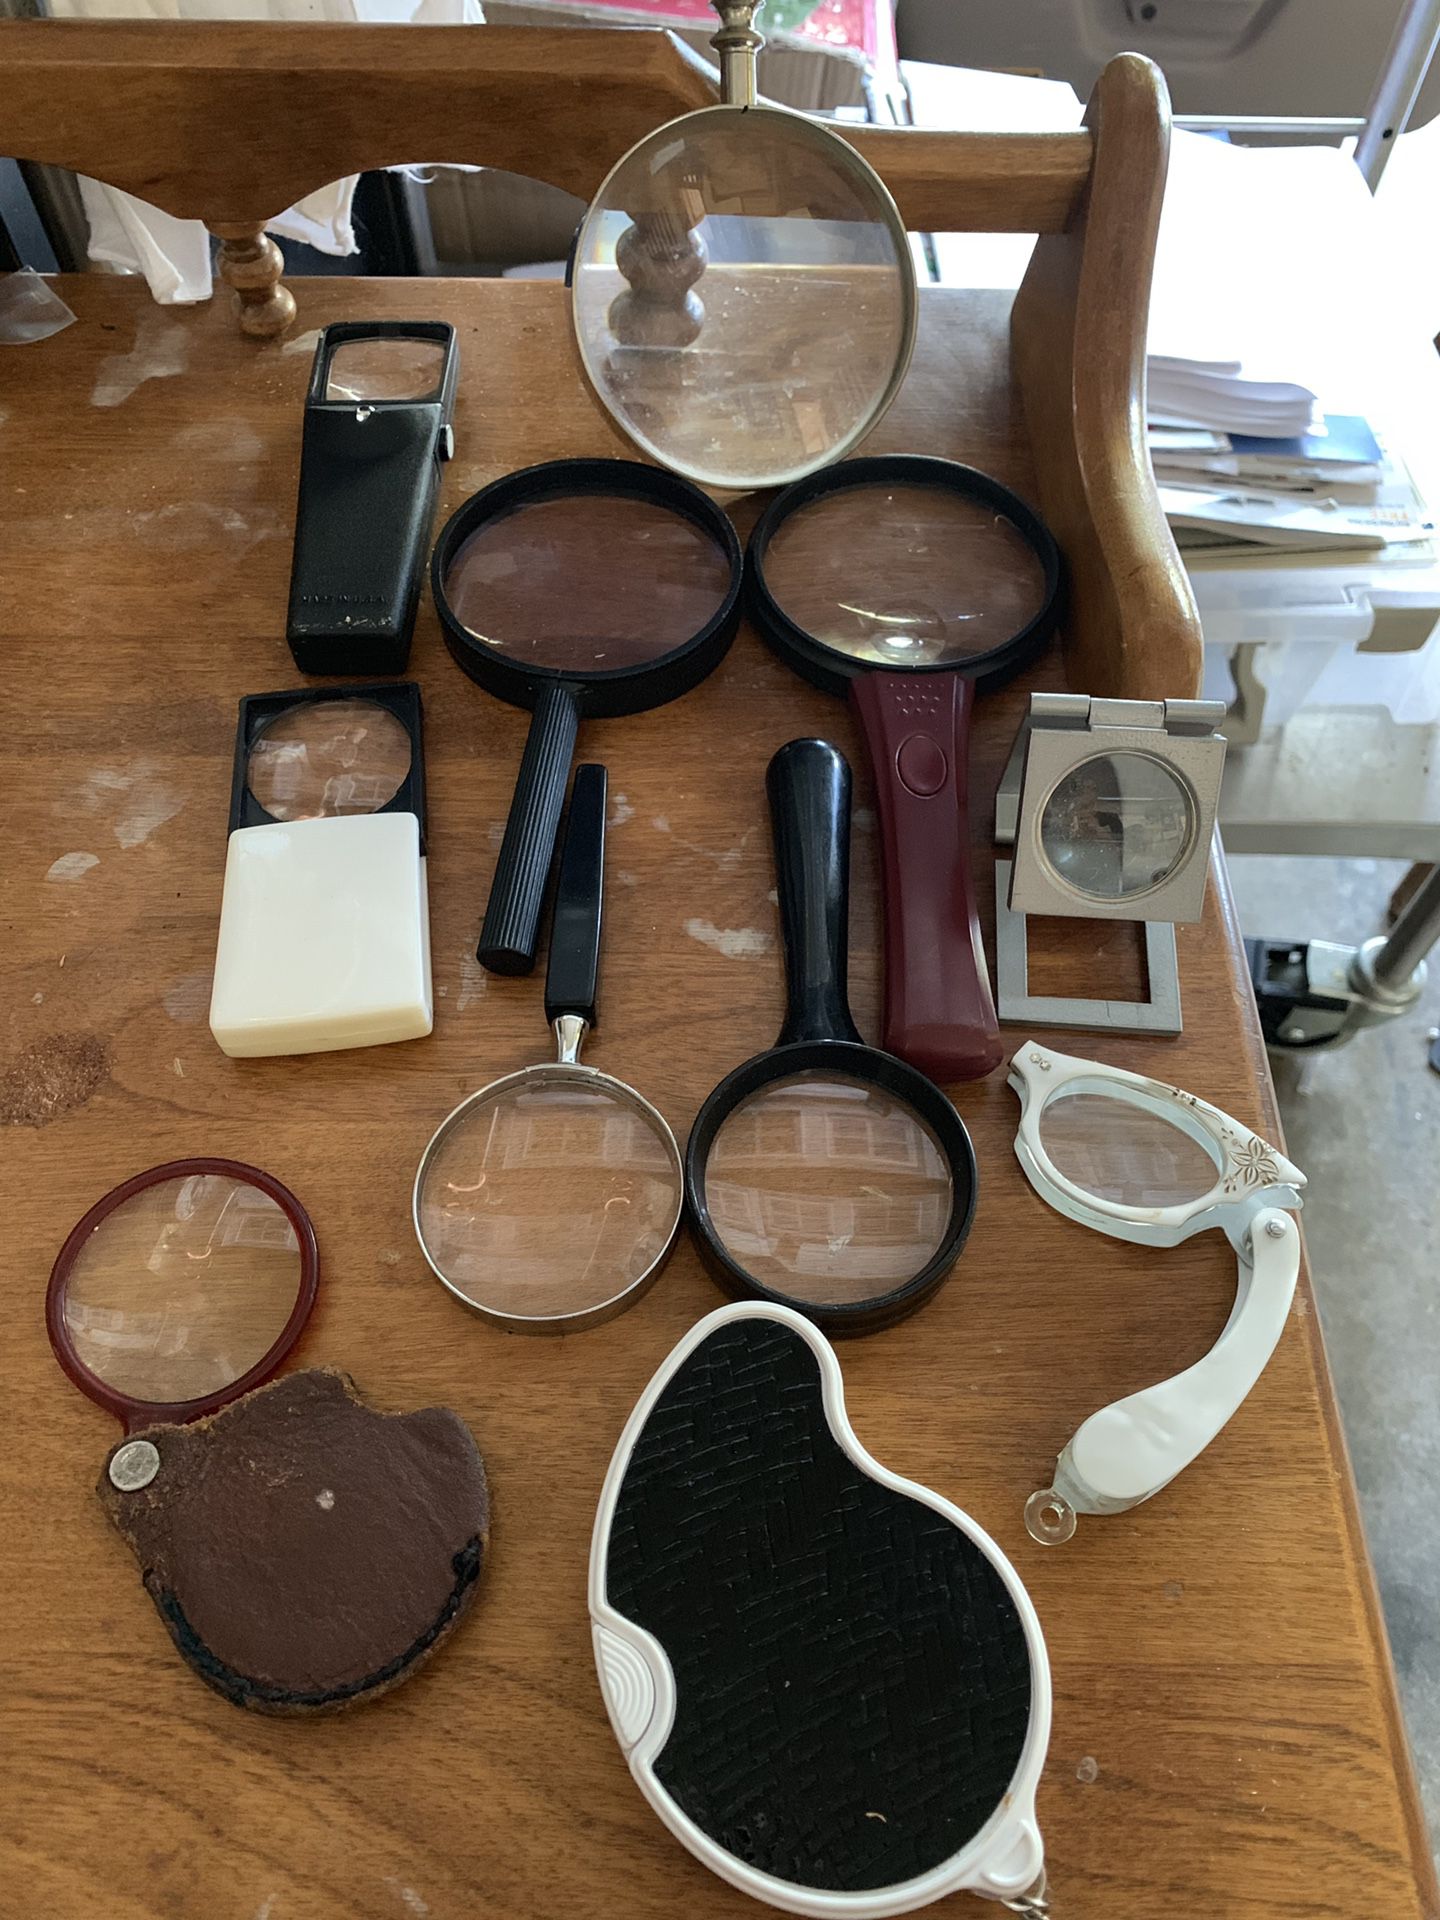 Magnifying glass collection